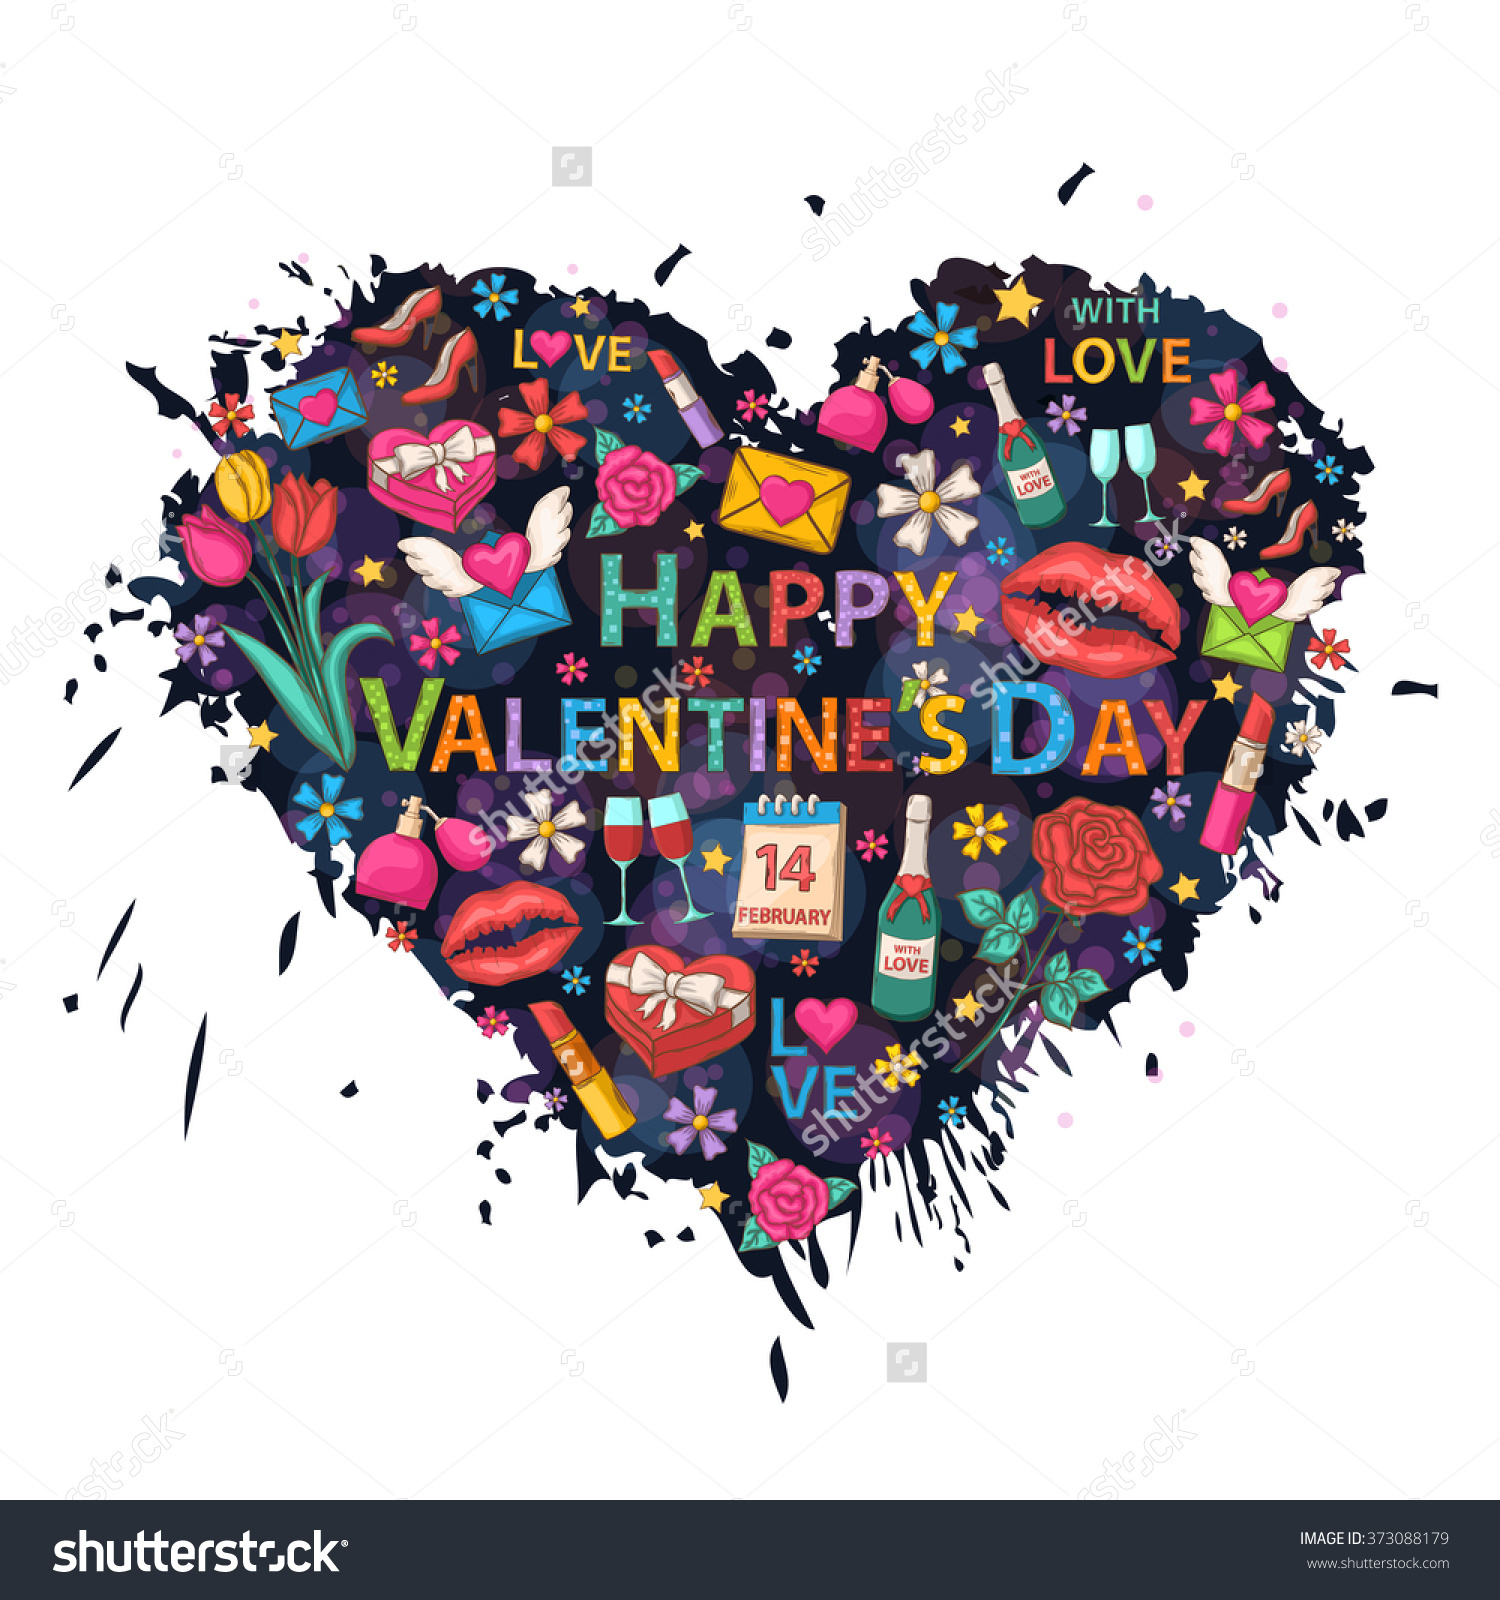 happy valentines day clipart flowers - Clipground